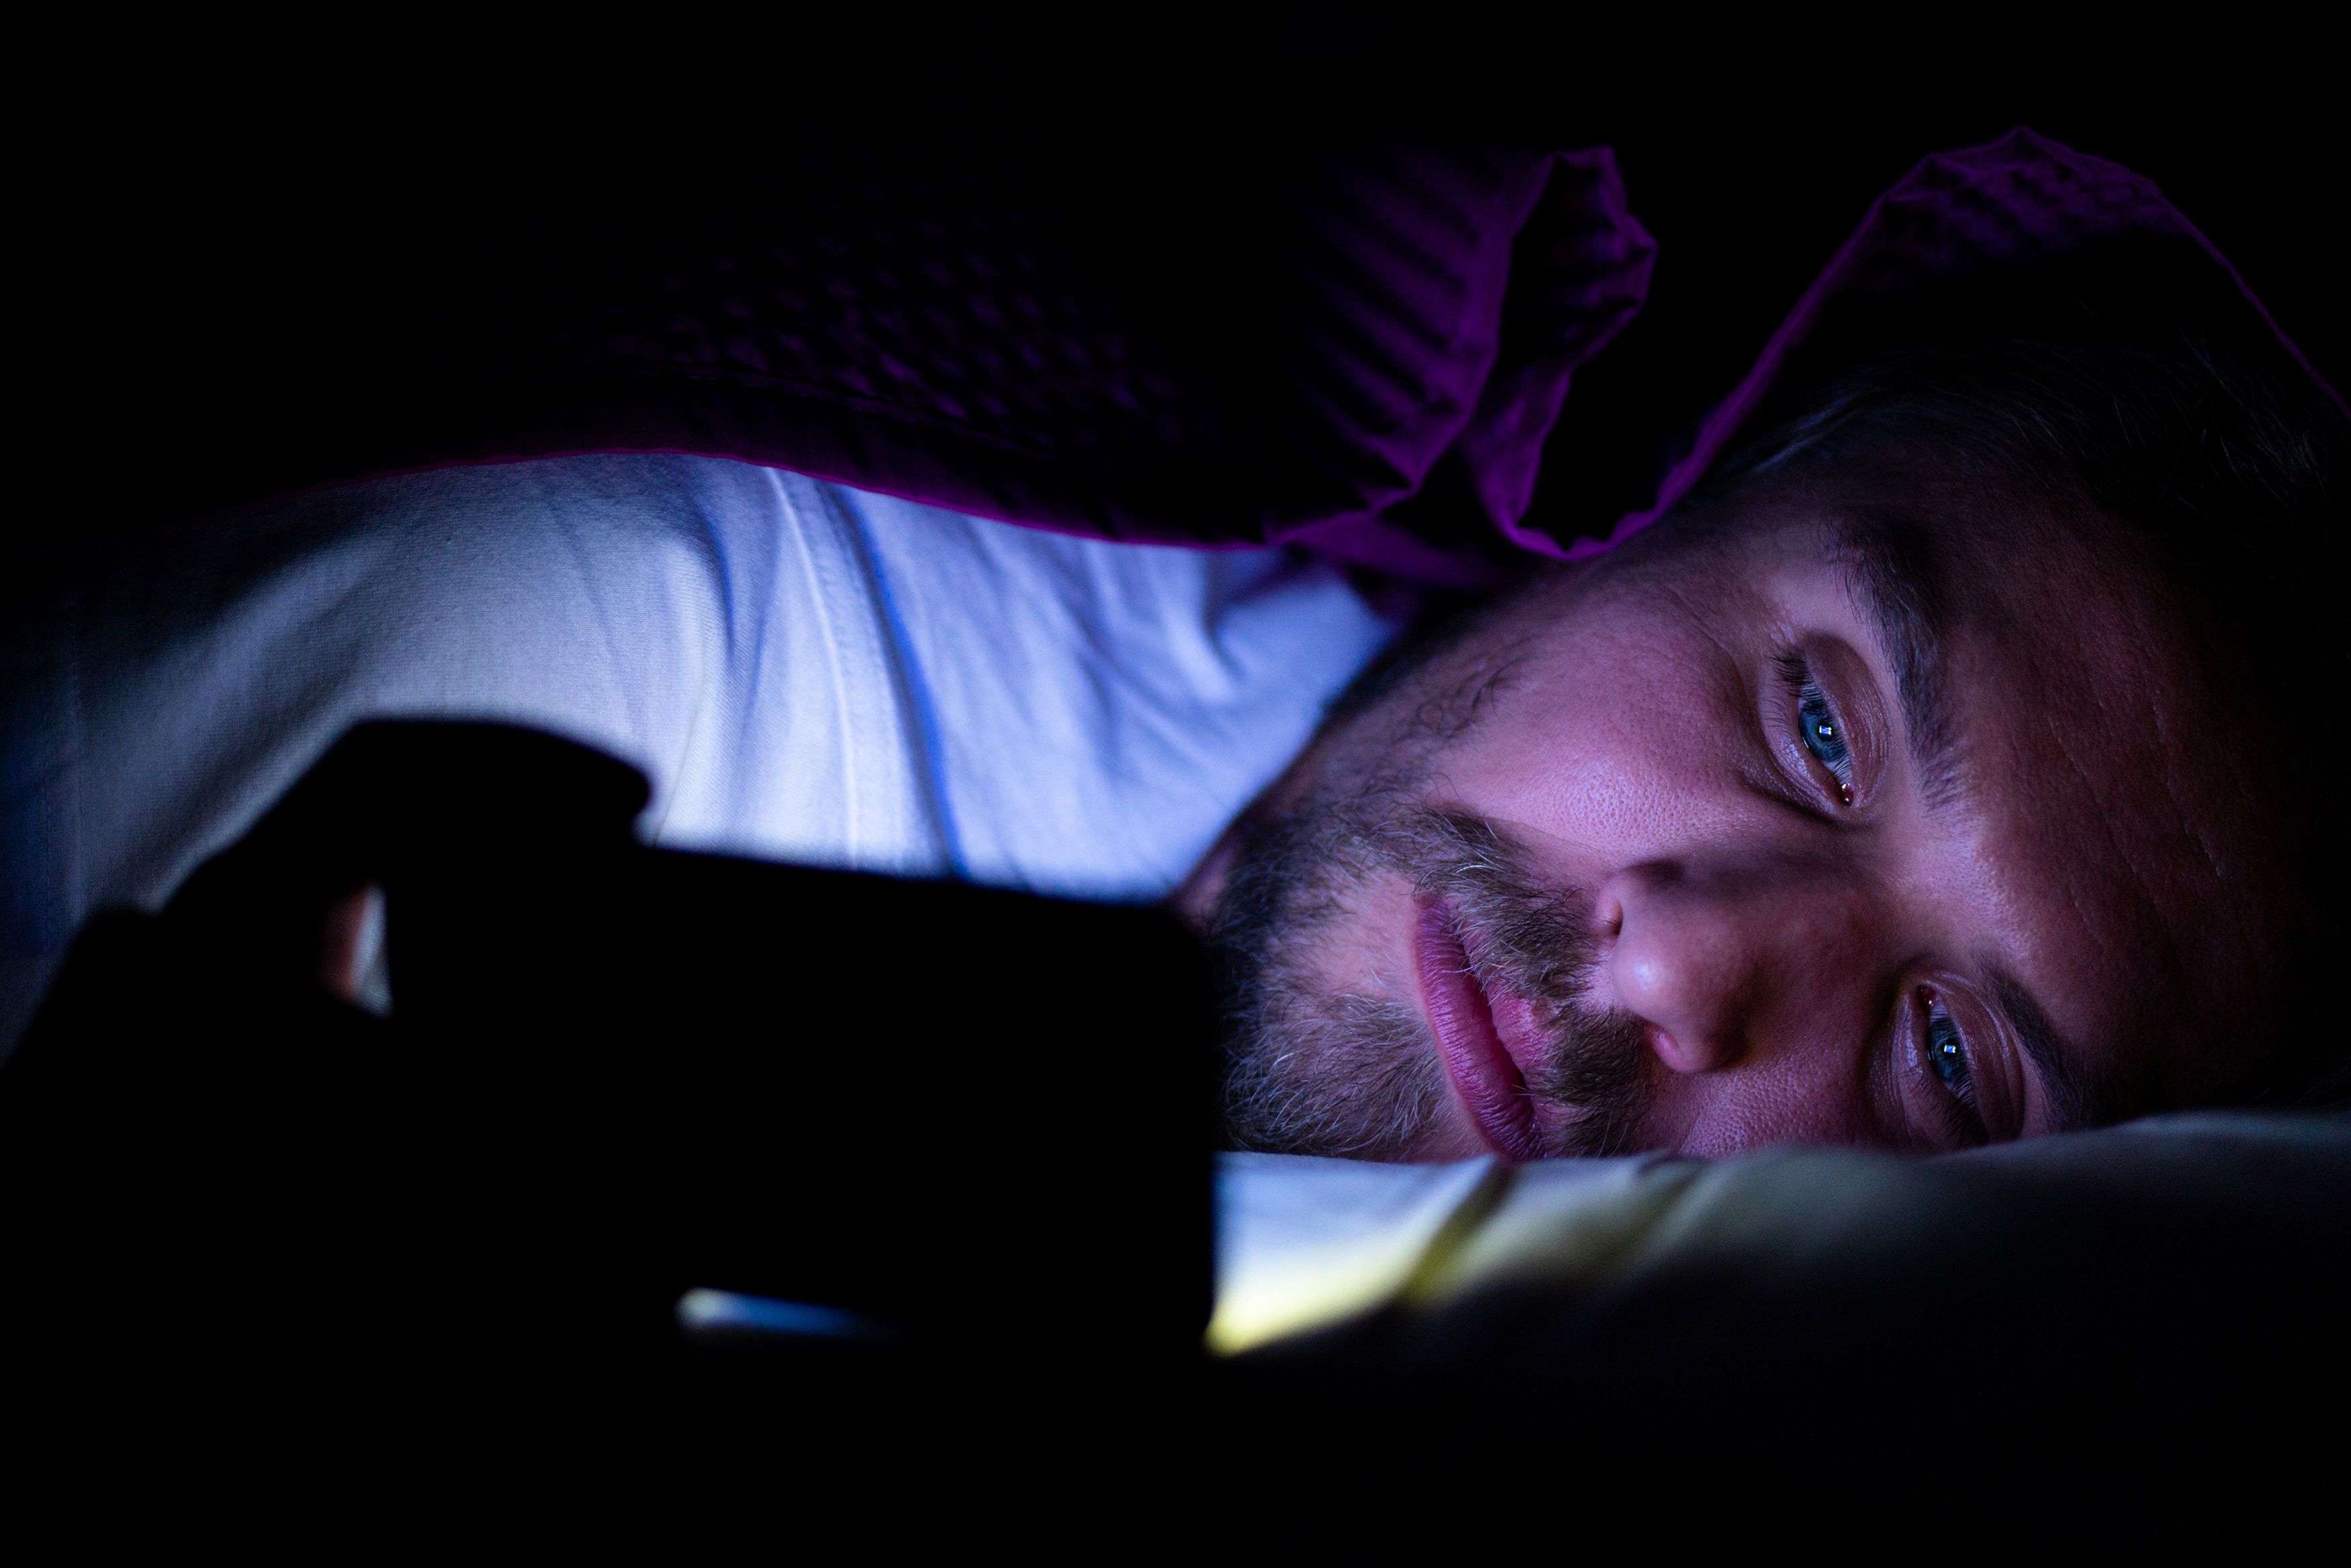 Sleepingxnxcom - Why Men Are Turning to Porn as a Mental Health Coping Strategy